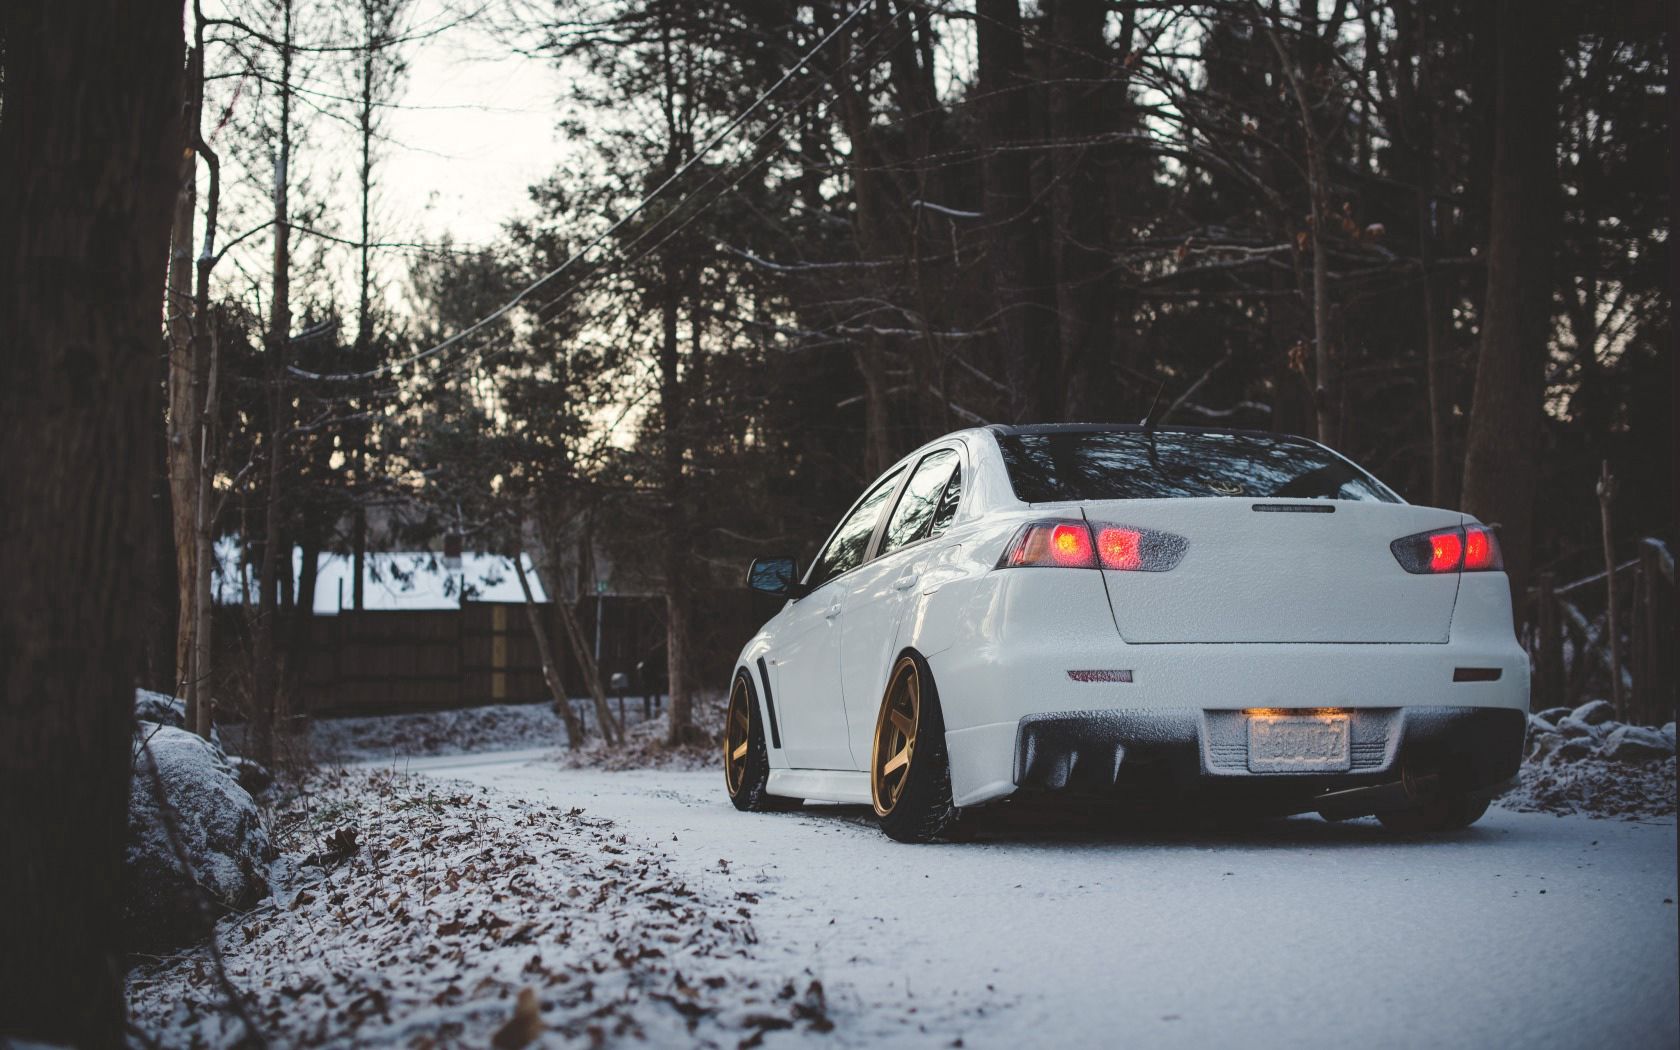 mitsubishi, cars, winter, back view, rear view, lancer wallpaper for mobile